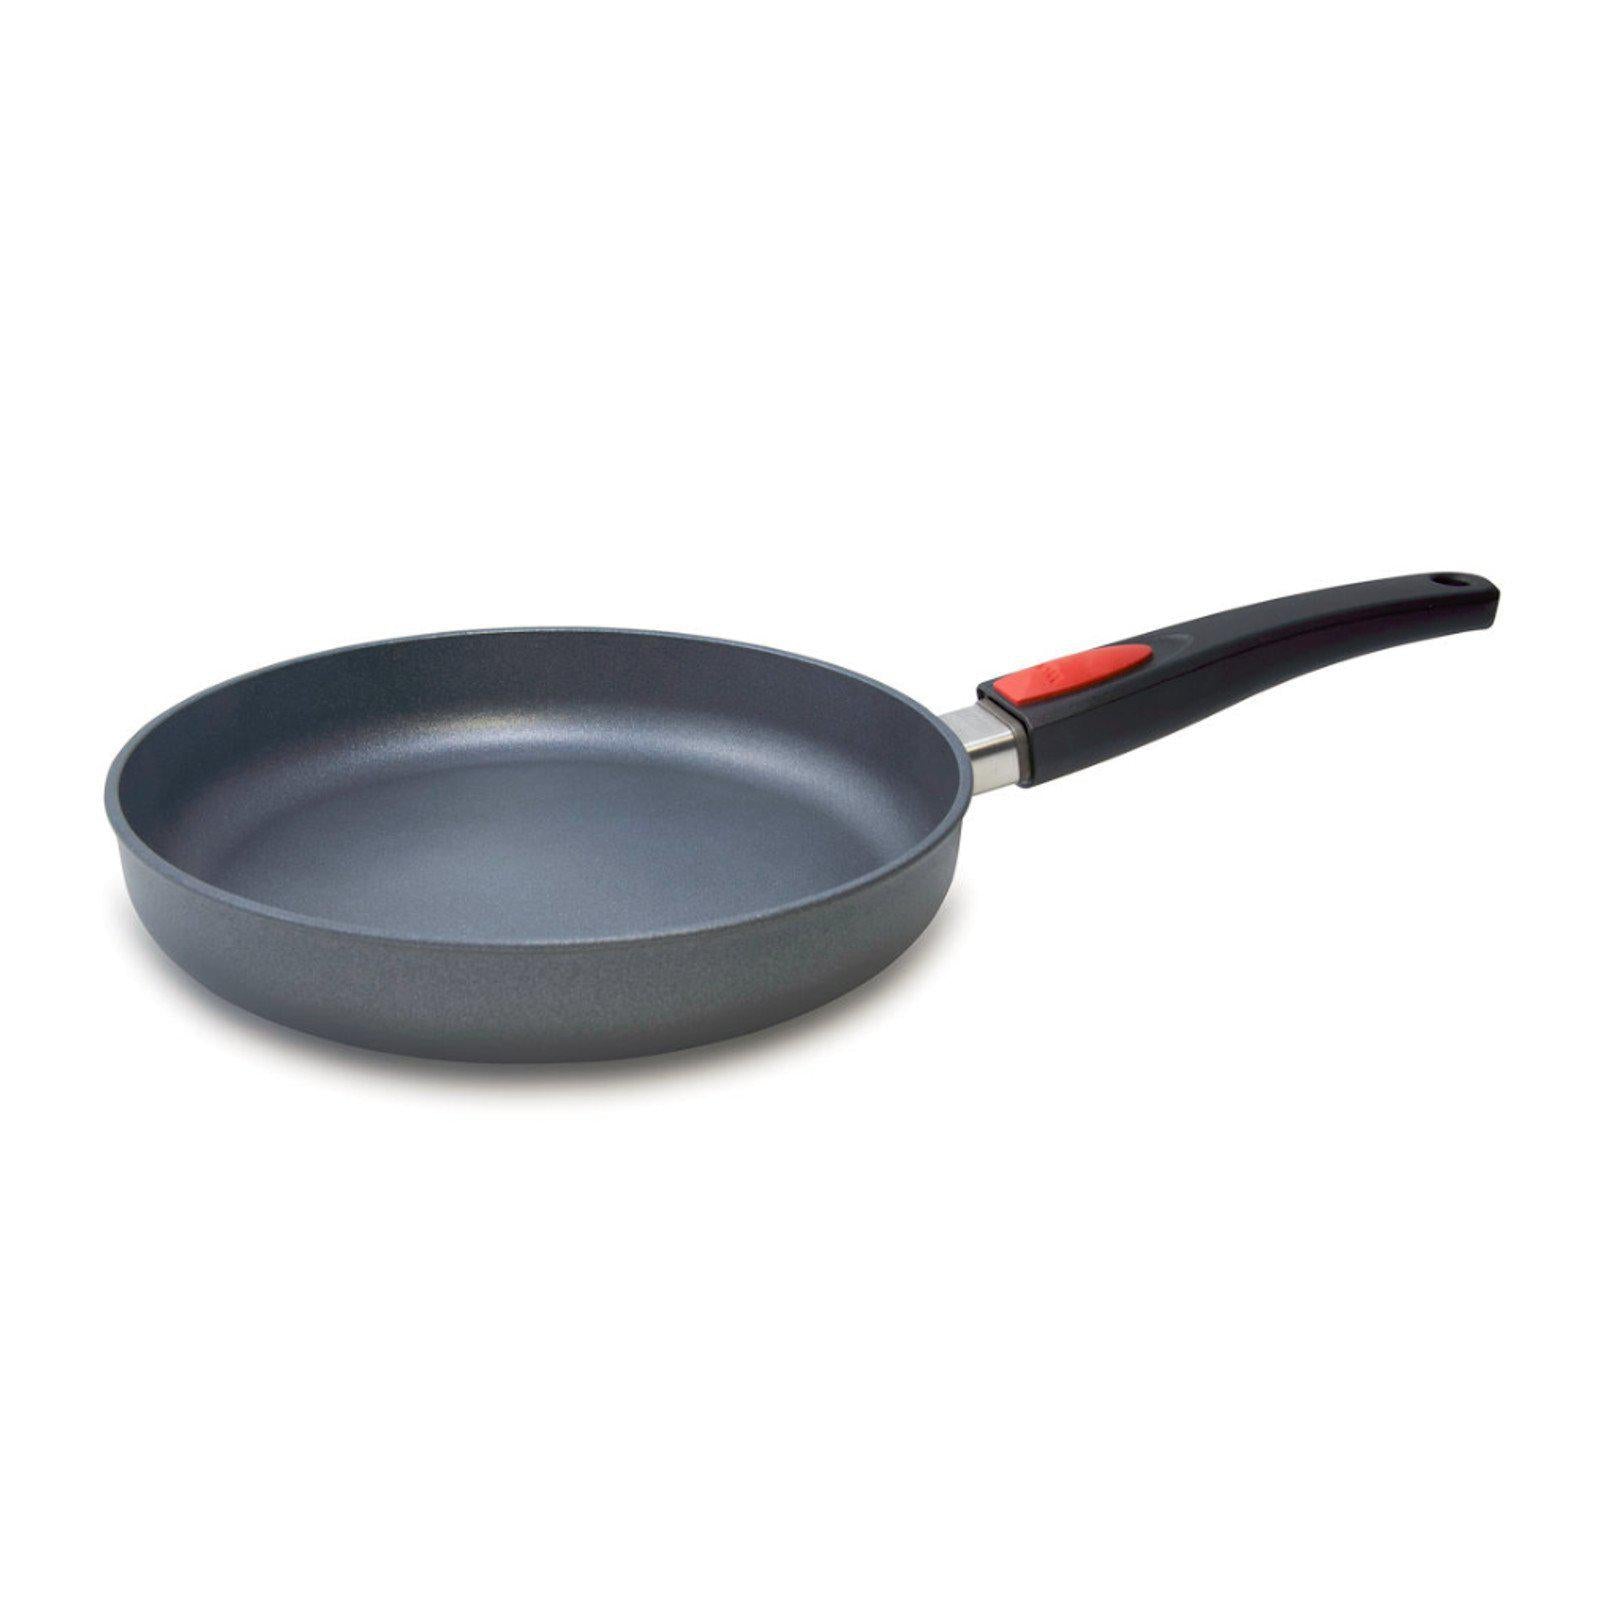 Woll Diamond Lite 28 cm Induction Frying Pan-Frying Pan-Chef's Quality Cookware